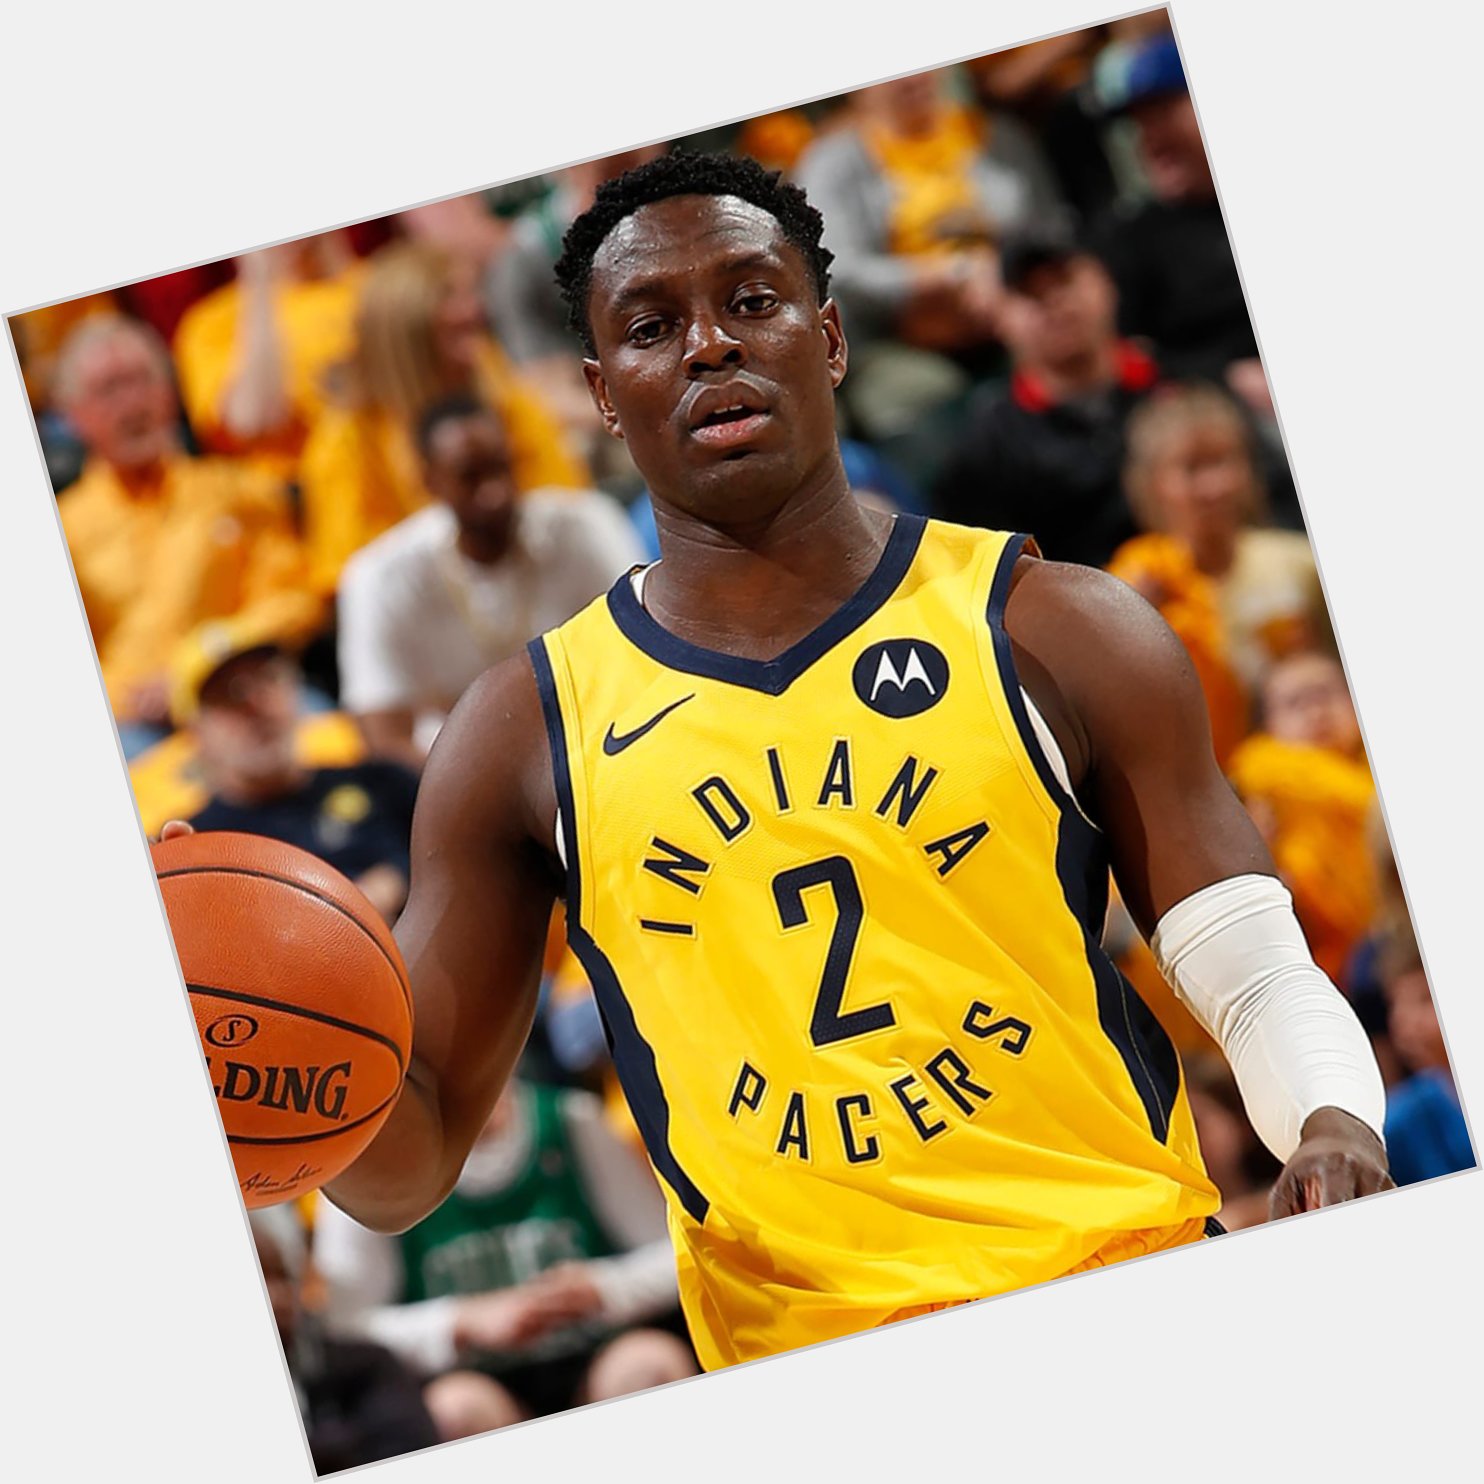 Happy Birthday to these former Indiana Pacers, Darren Collison (35 years old) and Rik Smits (56 years old). 